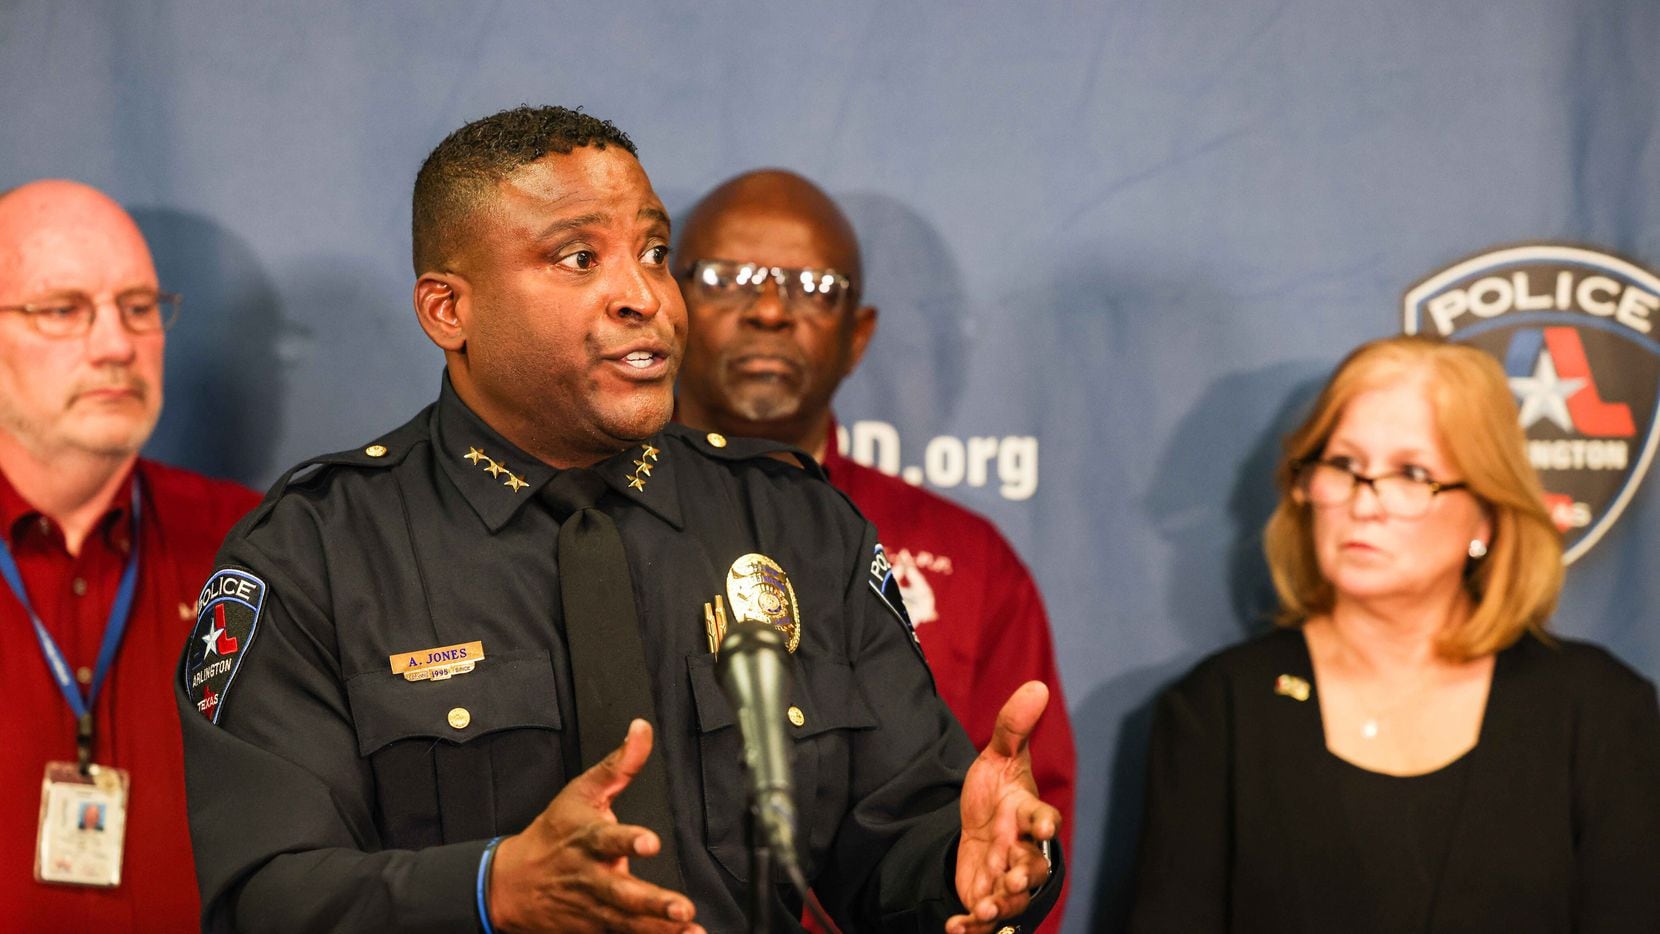 Arlington police Chief Al Jones spoke during a news conference Friday about the fatal shooting.